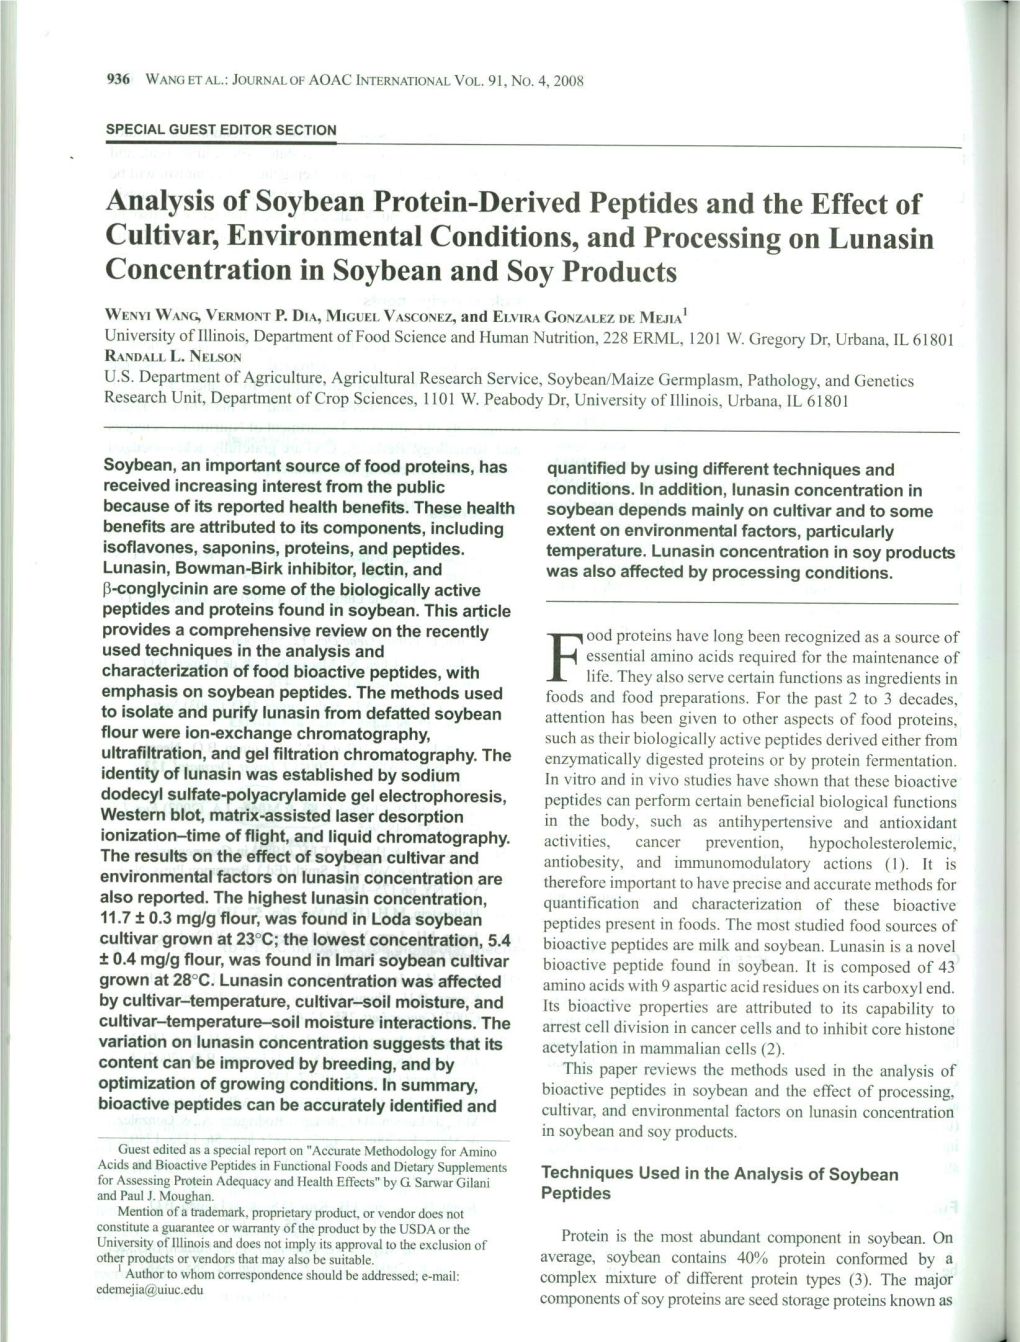 Analysis of Soybean Protein-Derived Peptides and the Effect of Cultivar, Environmental Conditions, and Processing on Lunasin Concentration in Soybean and Soy Products